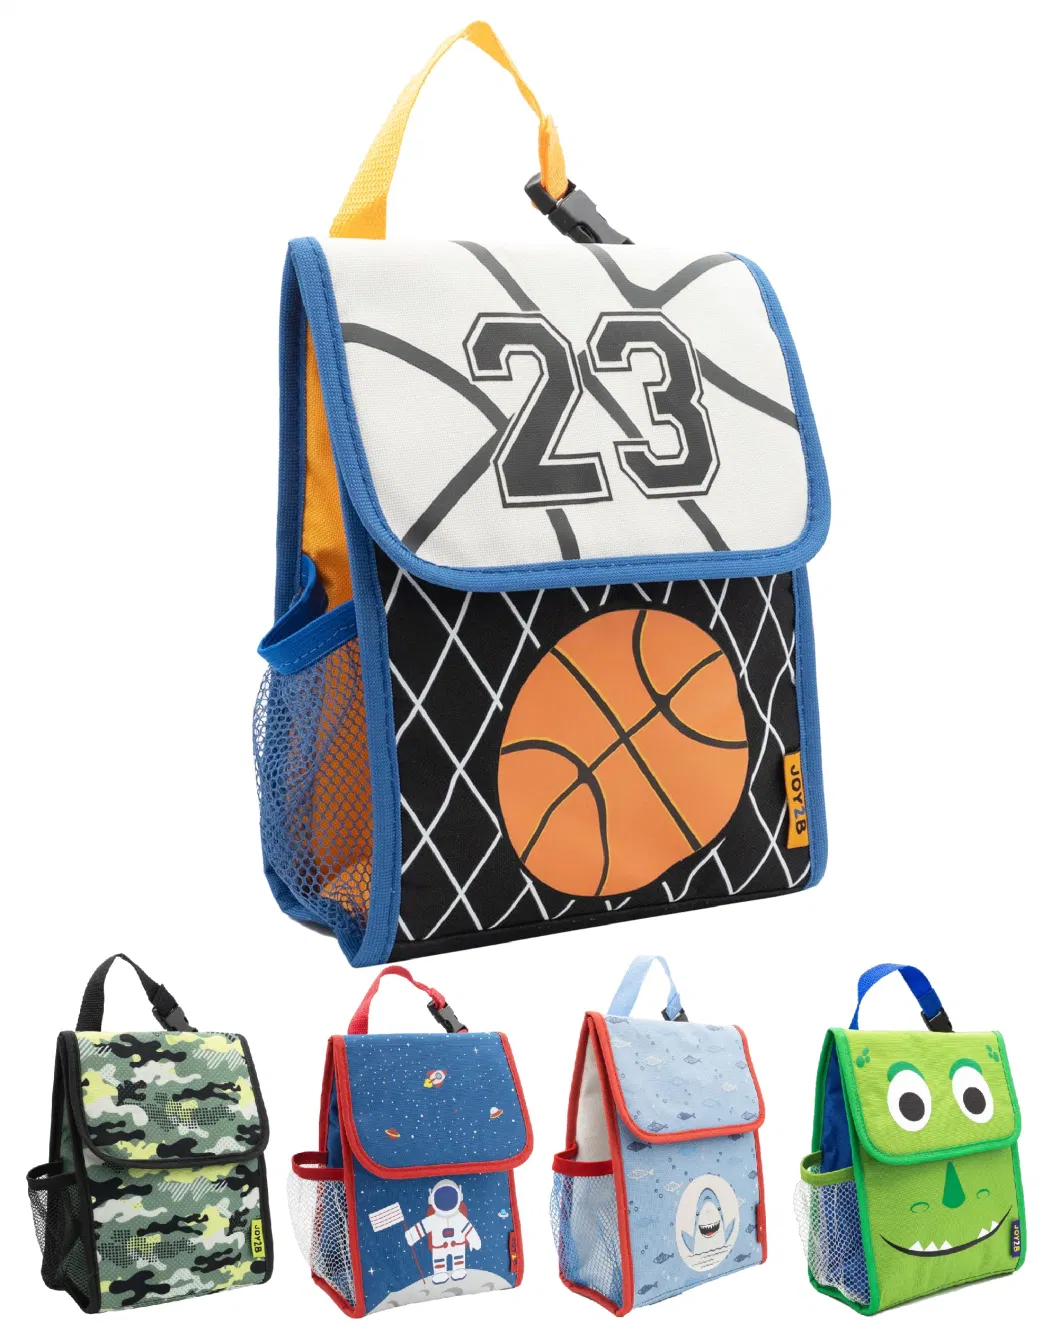 Insulated Dino Lunch Bag Kids with Water Bottle Holder Reusable Snack Bags for Boys and Girls Dinosaur Lunch Box Kids Perfect for School